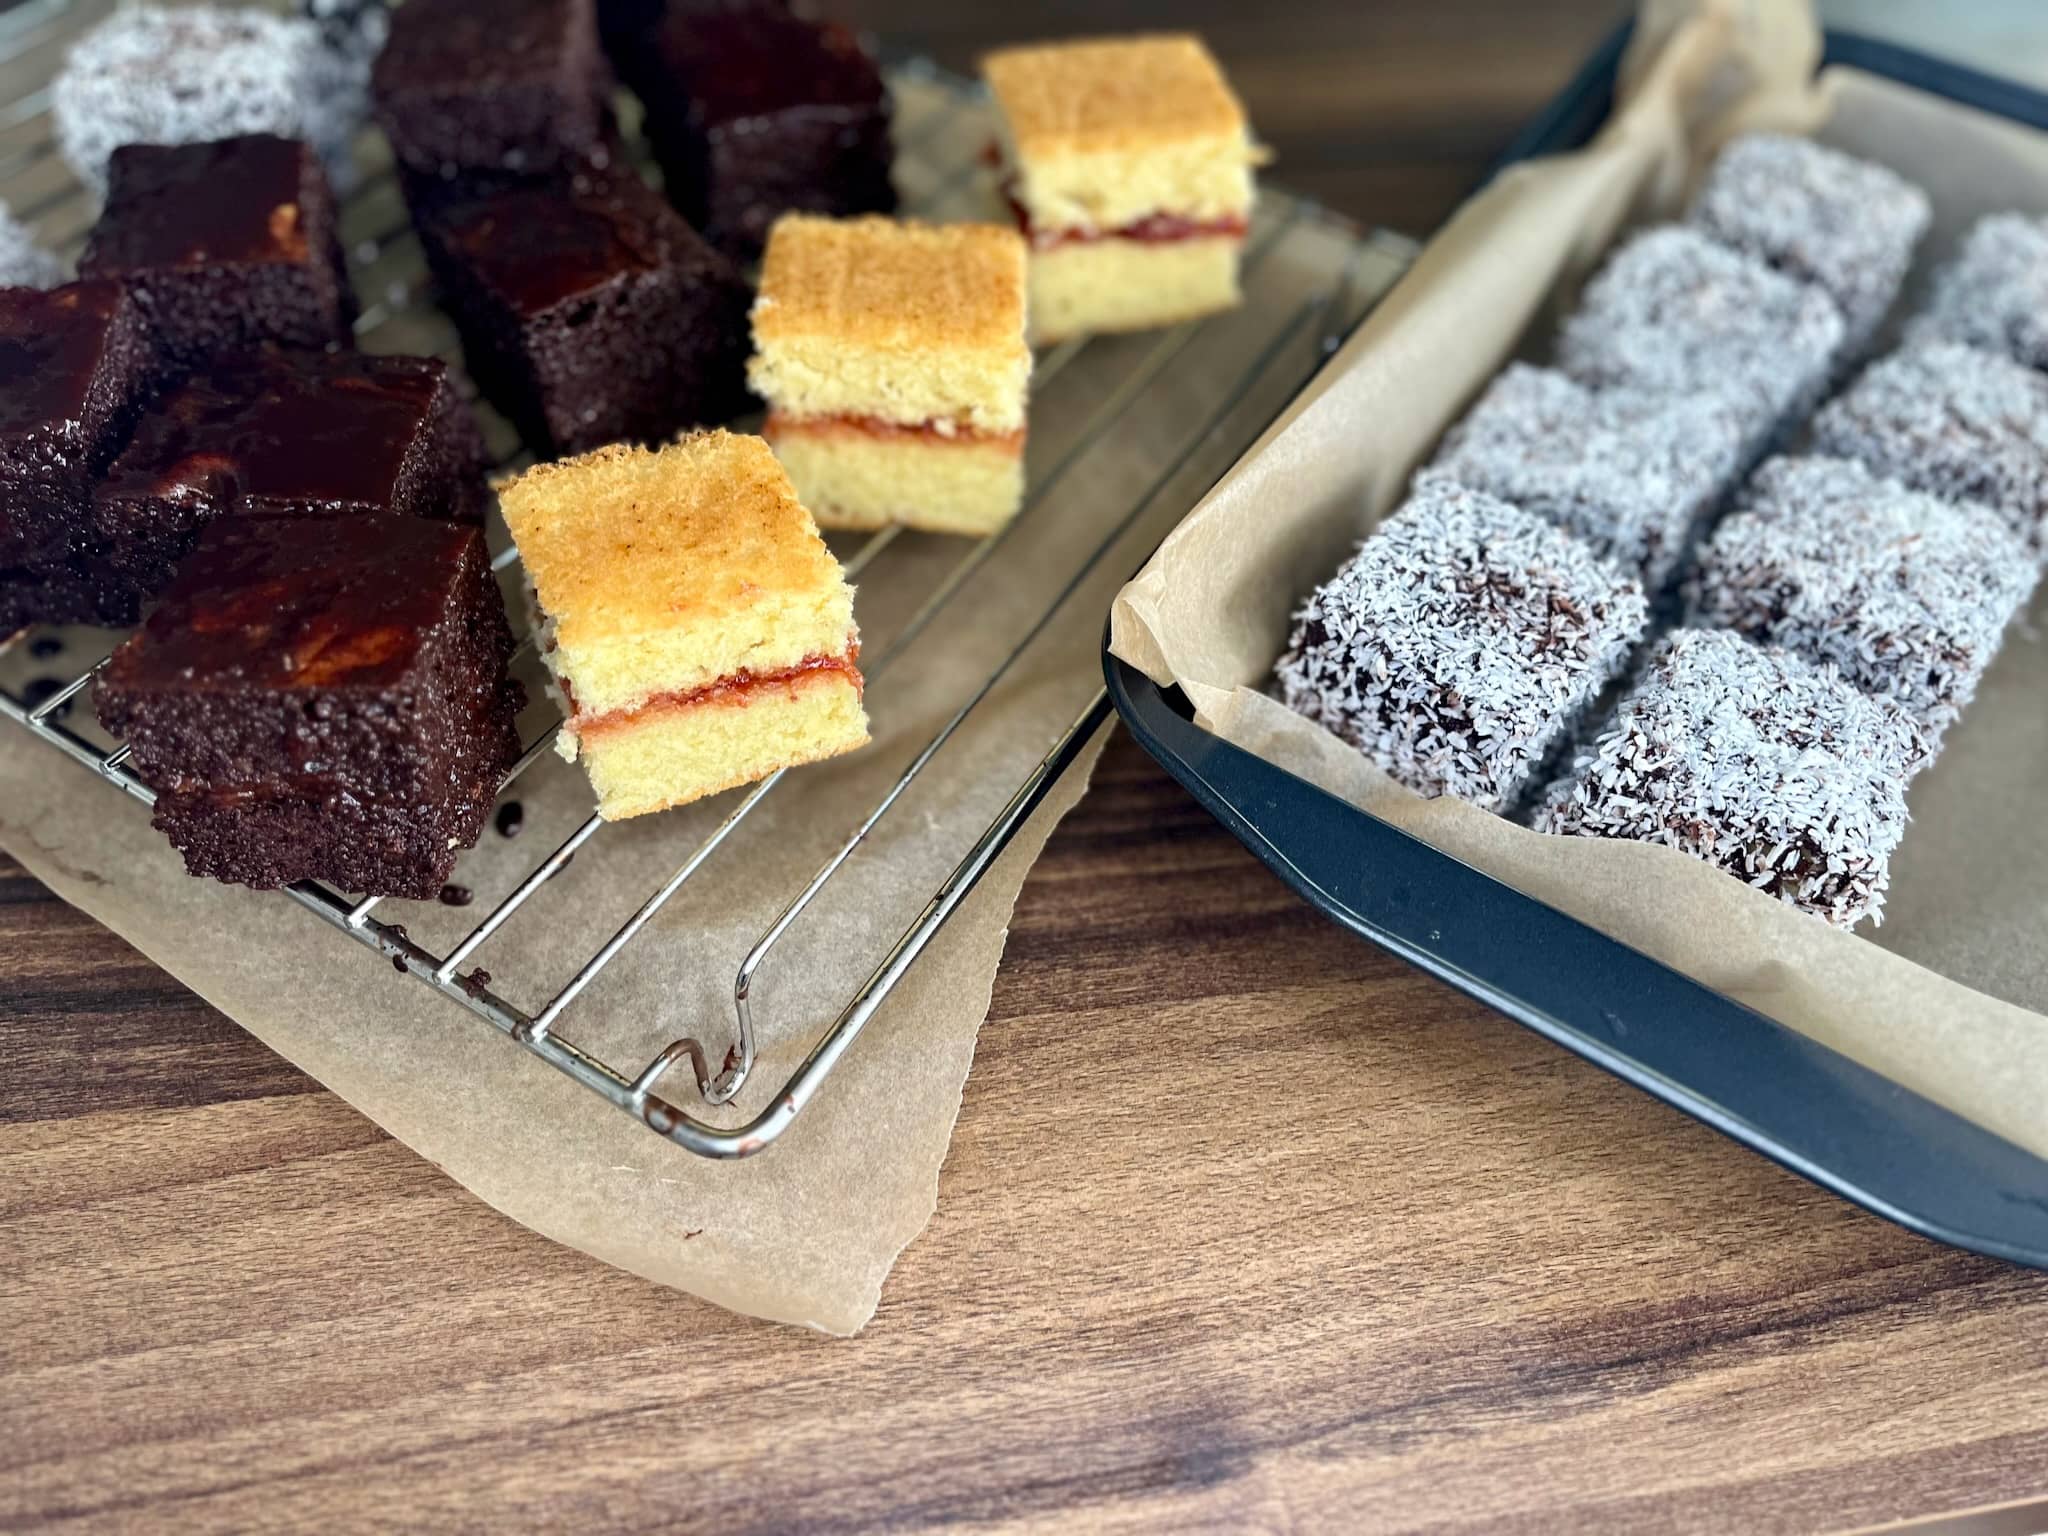 Plain sponge squares, squares coated in chocolate and suares coated in desiccated coconut making Lamingtons